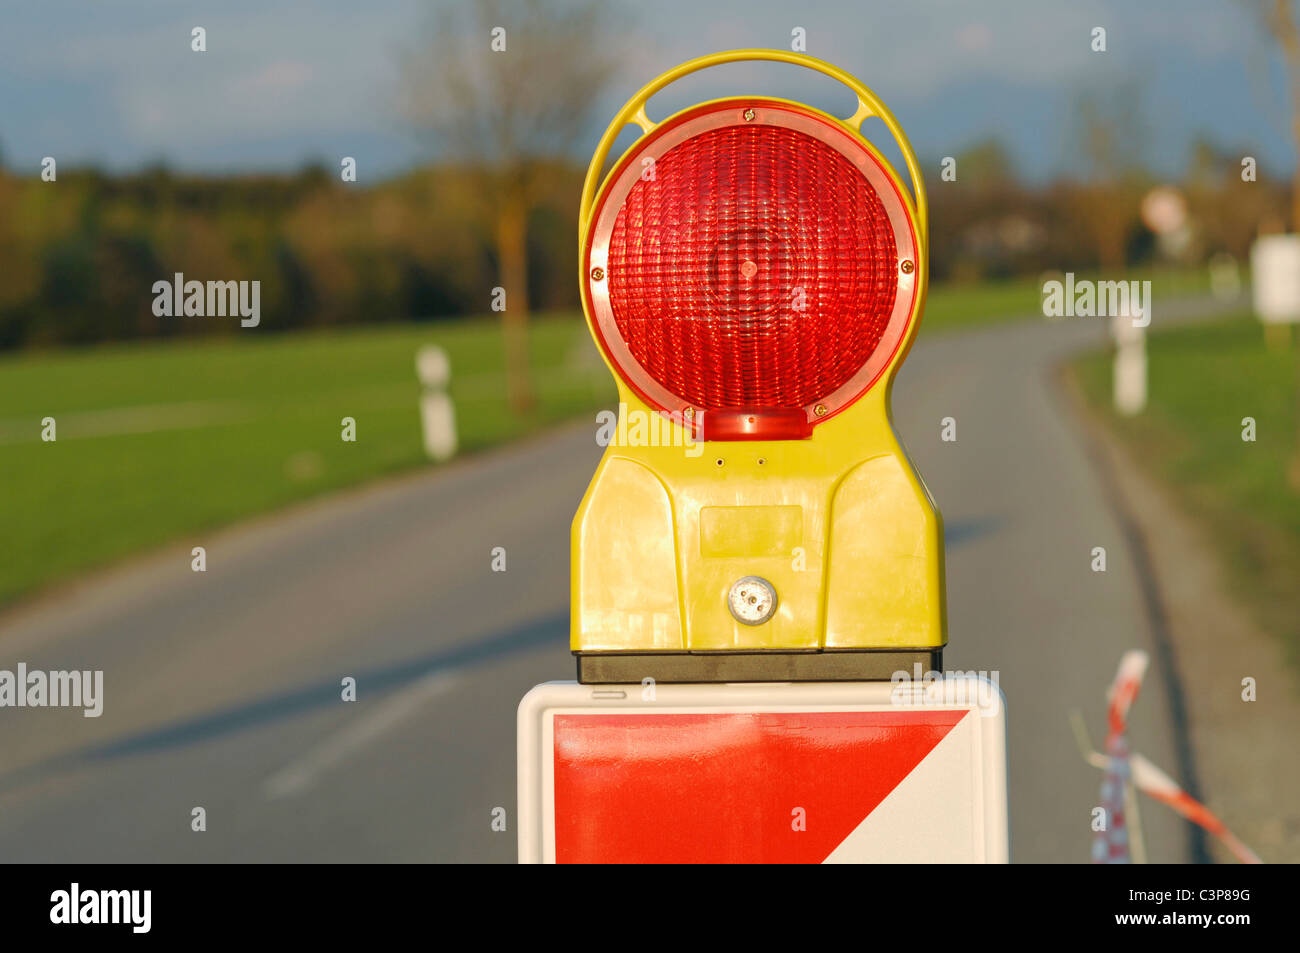 Germany, Signal lamp on road, close-up Stock Photo